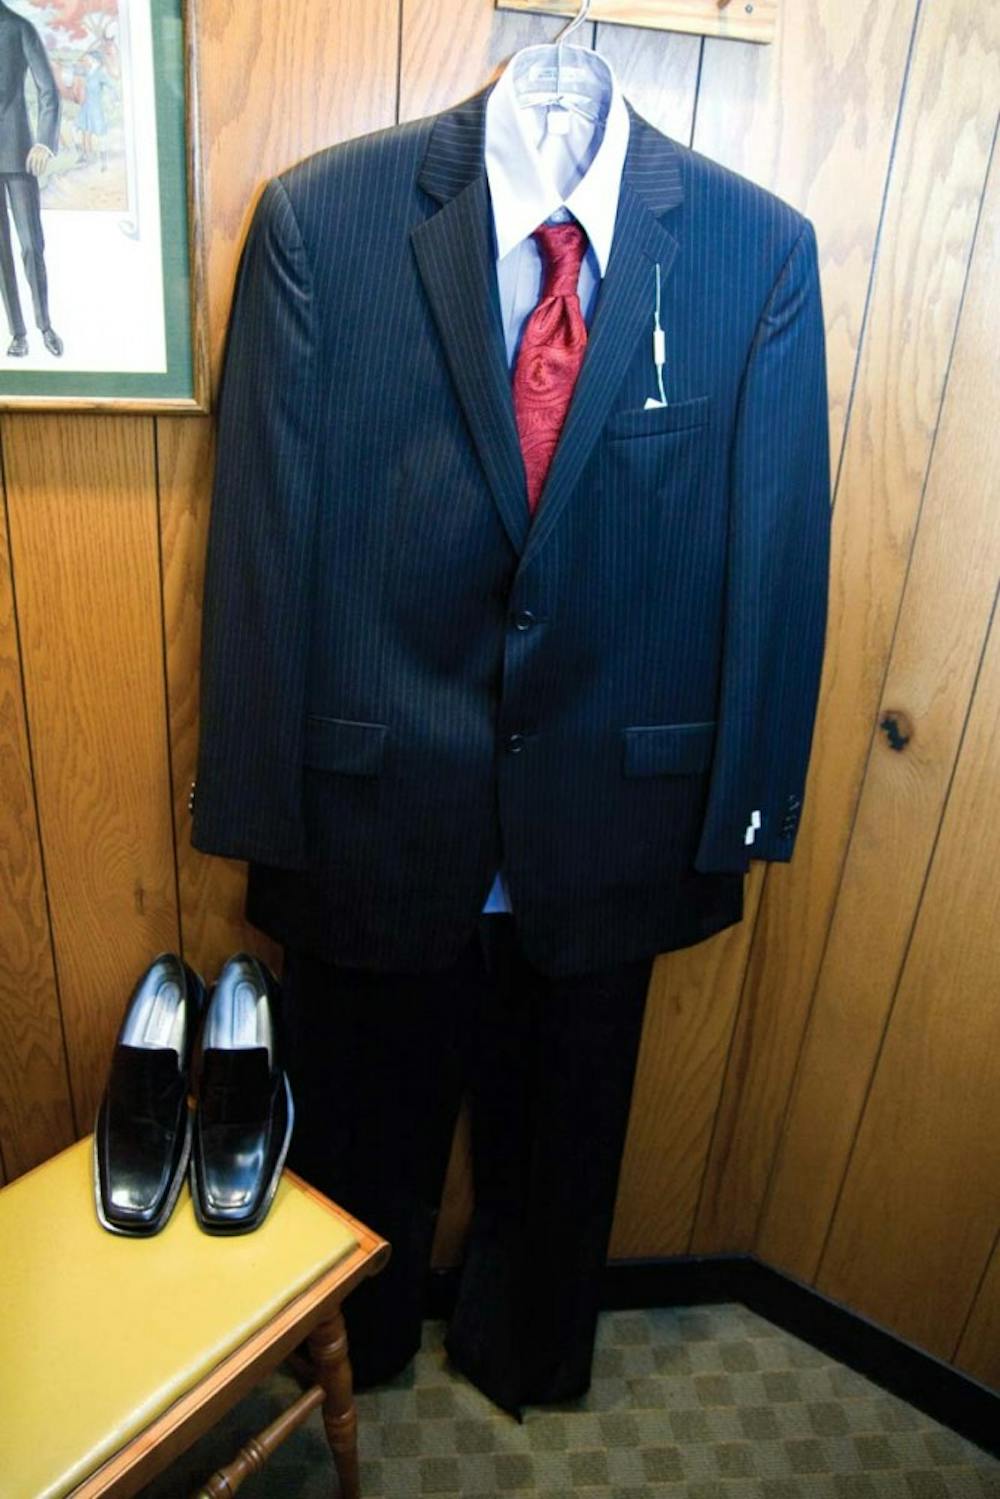 O'Sullivan's on 114 N. Washington St.
• Michael Kors striped suit-set: $295
• Countess Maria red patterned tie: $50
• Light blue Kenneth Cole button-up shirt: $59.50
• Kenneth Clue patent leather shoes: $165
TOTAL: $569.50